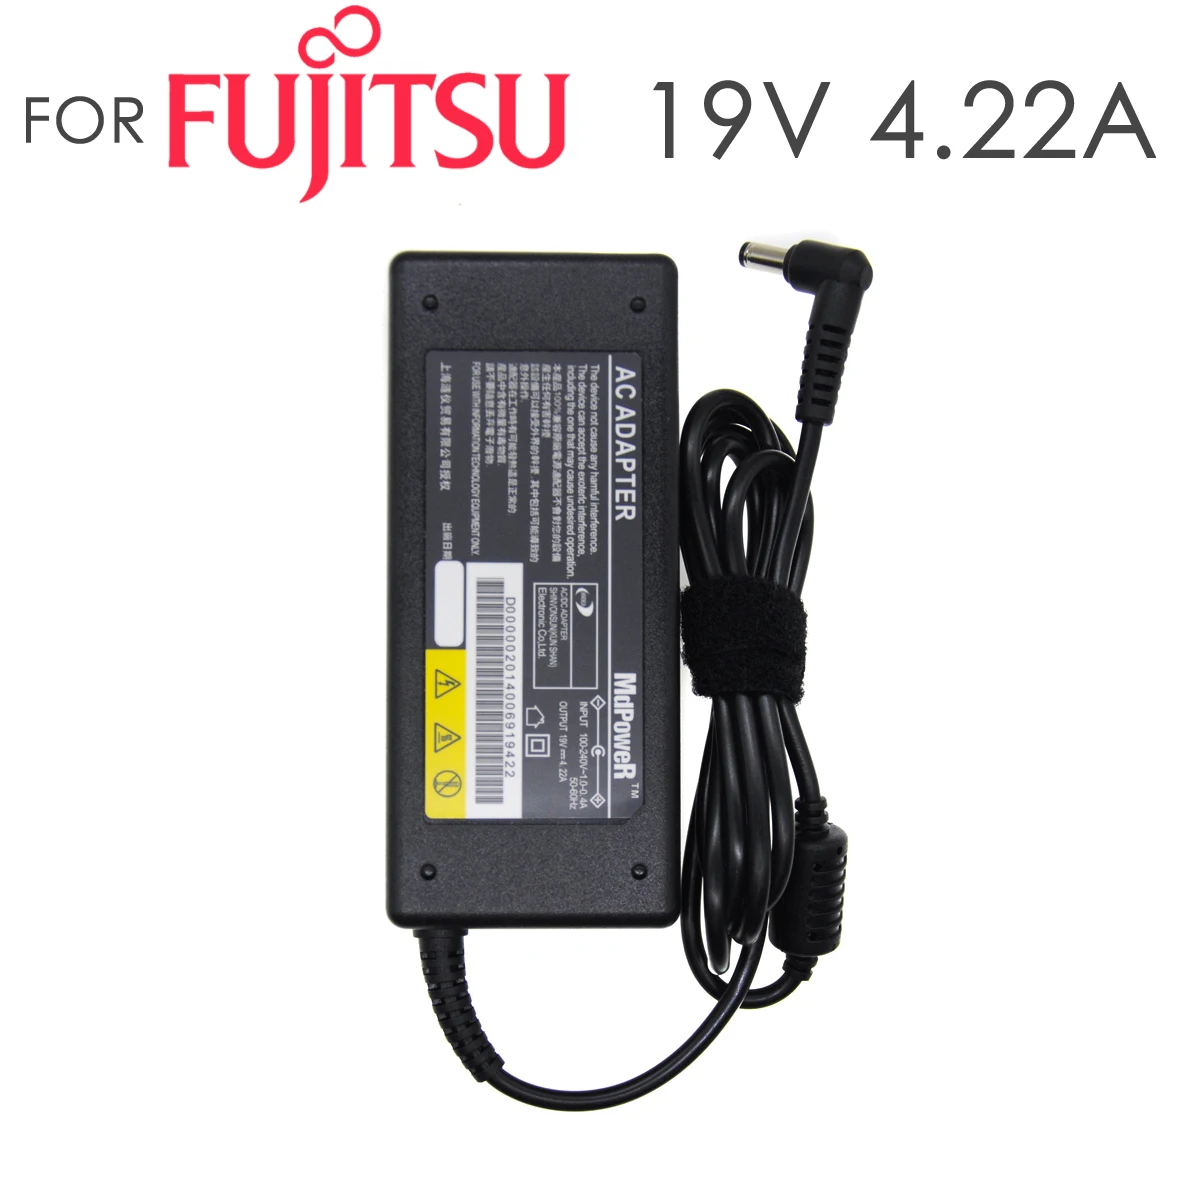 

For Fujitsu Lifebook S7210 S7220 S751 S752 S760 S761 S762 T1010 T4020 T4210 laptop power supply AC adapter charger 19V 4.22A